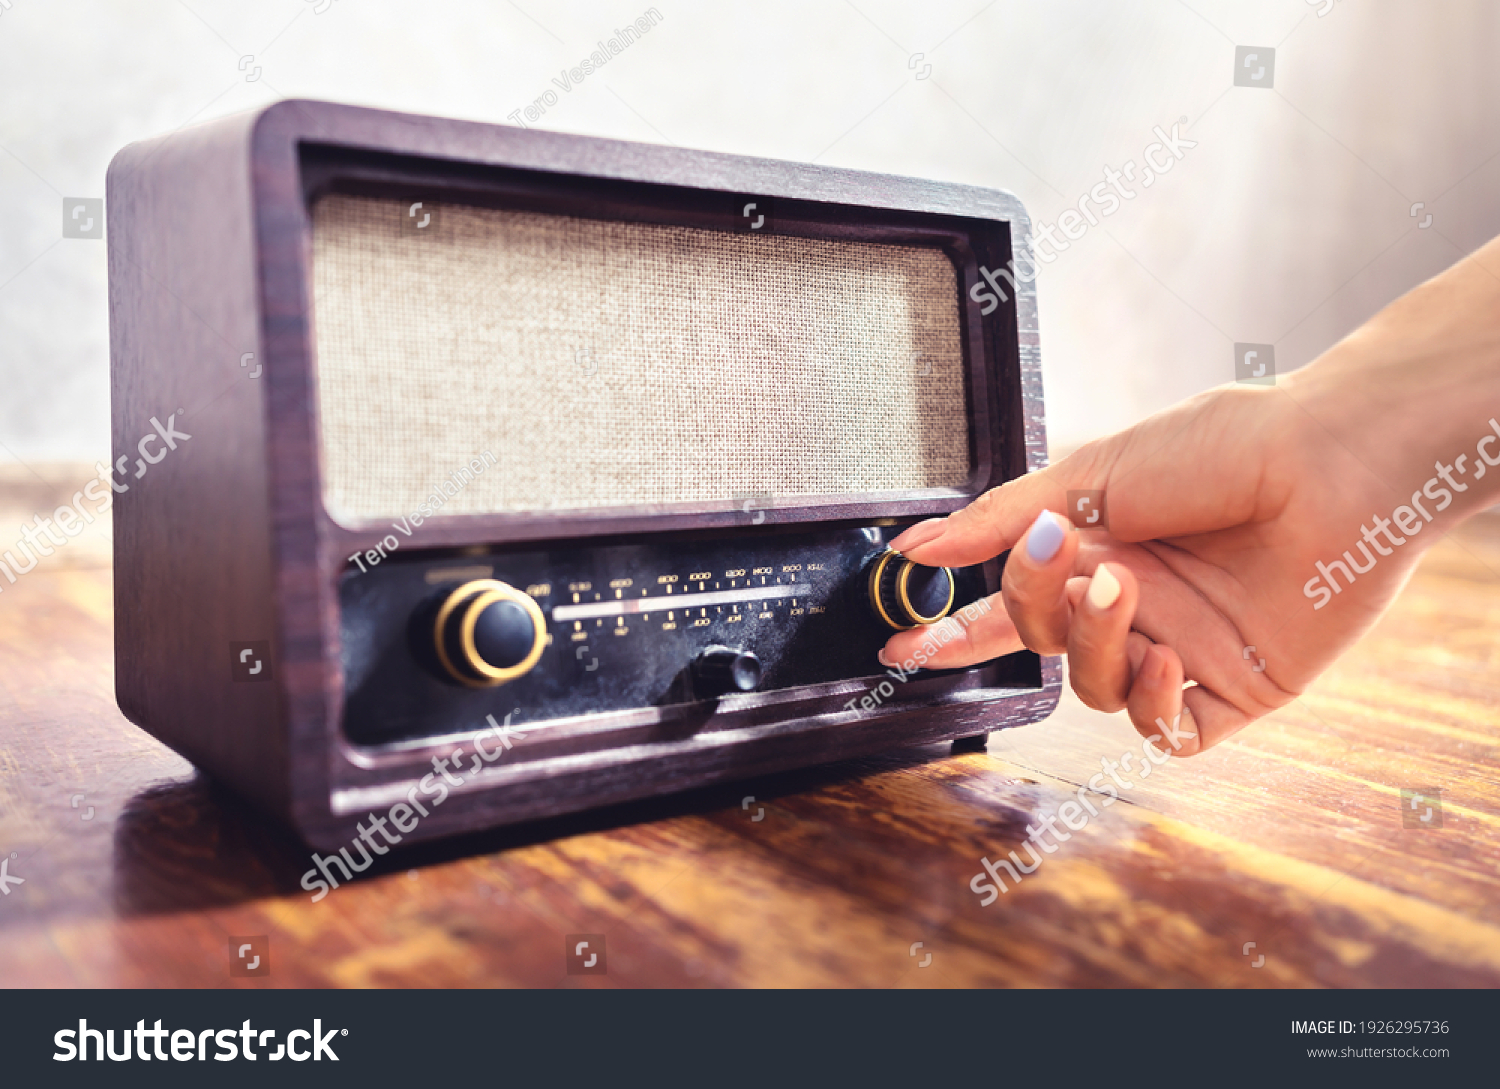 Retro radio tuning. Woman using old vintage music equipment. Adjusting volume or frequency tuner knob. Turning on or off stereo receiver or speaker. Changing channel or station with dial button. #1926295736